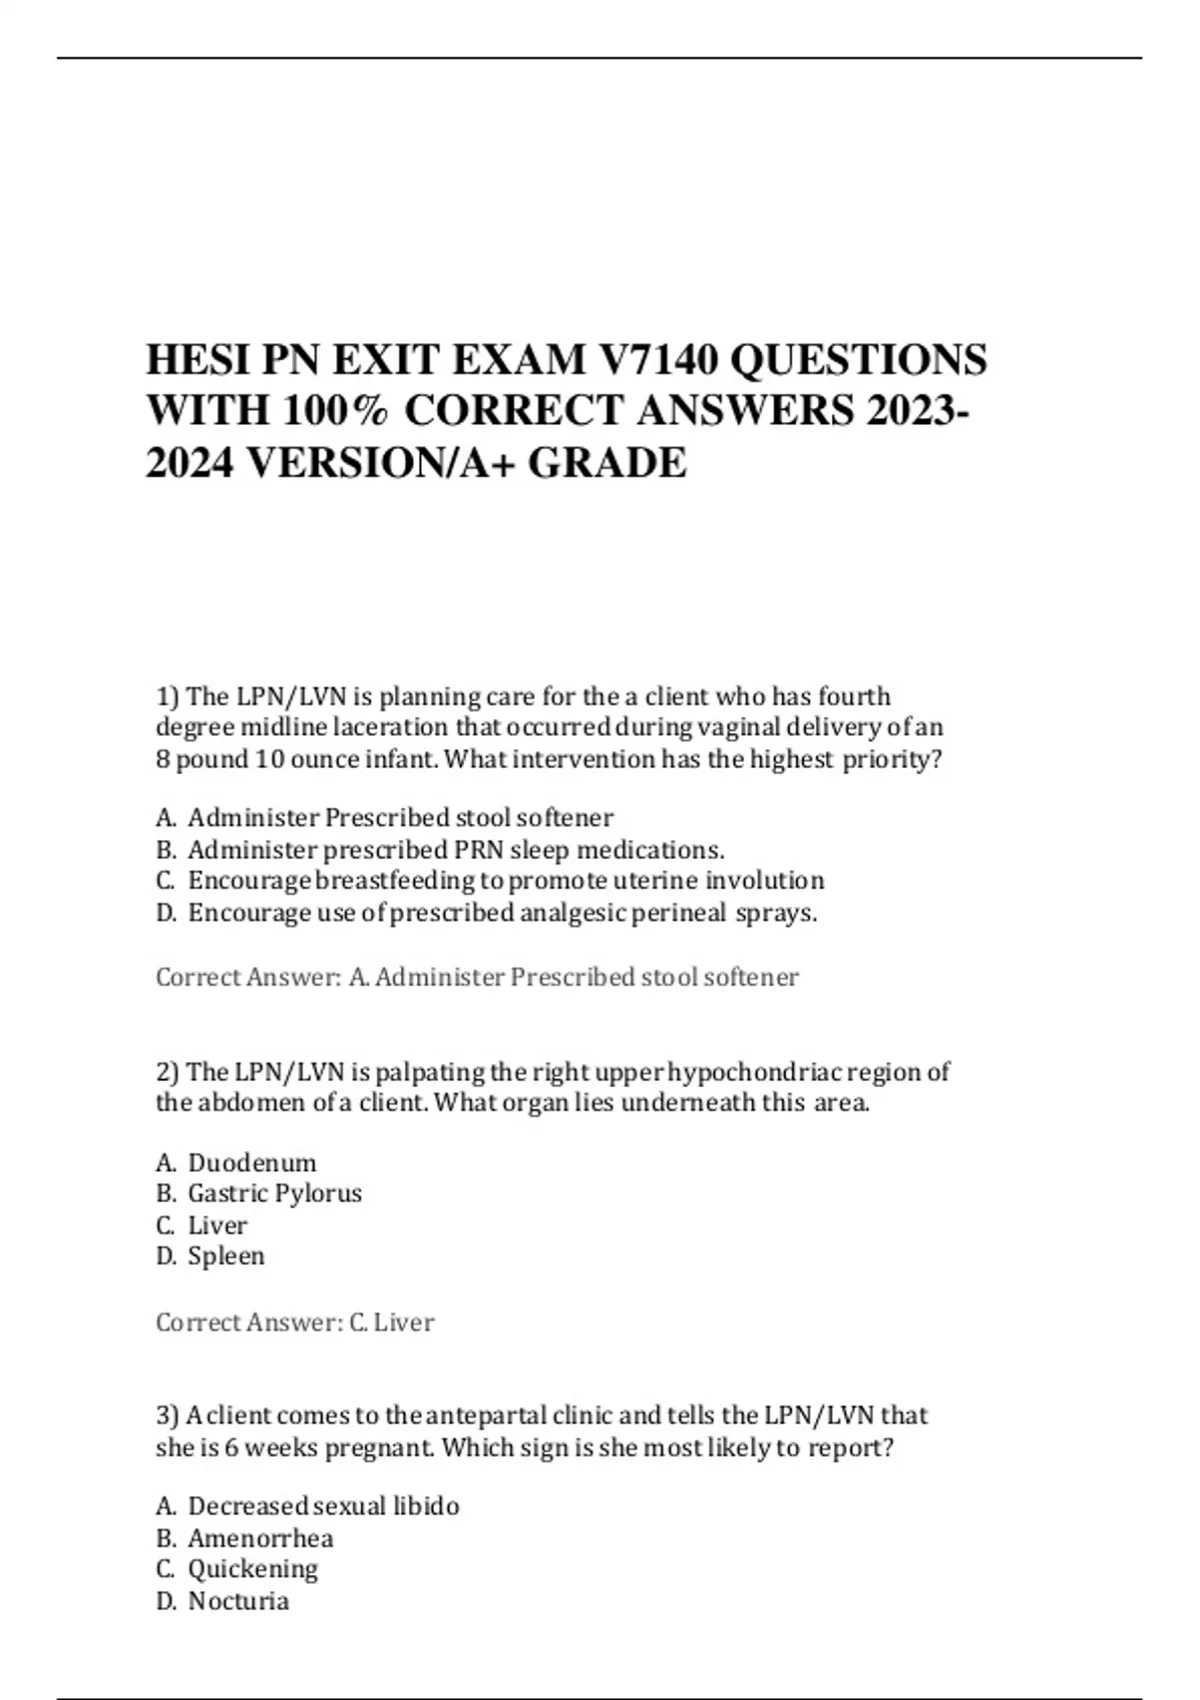 HESI PN EXIT EXAM V7140 QUESTIONS WITH 100 CORRECT ANSWERS VERSION/A+